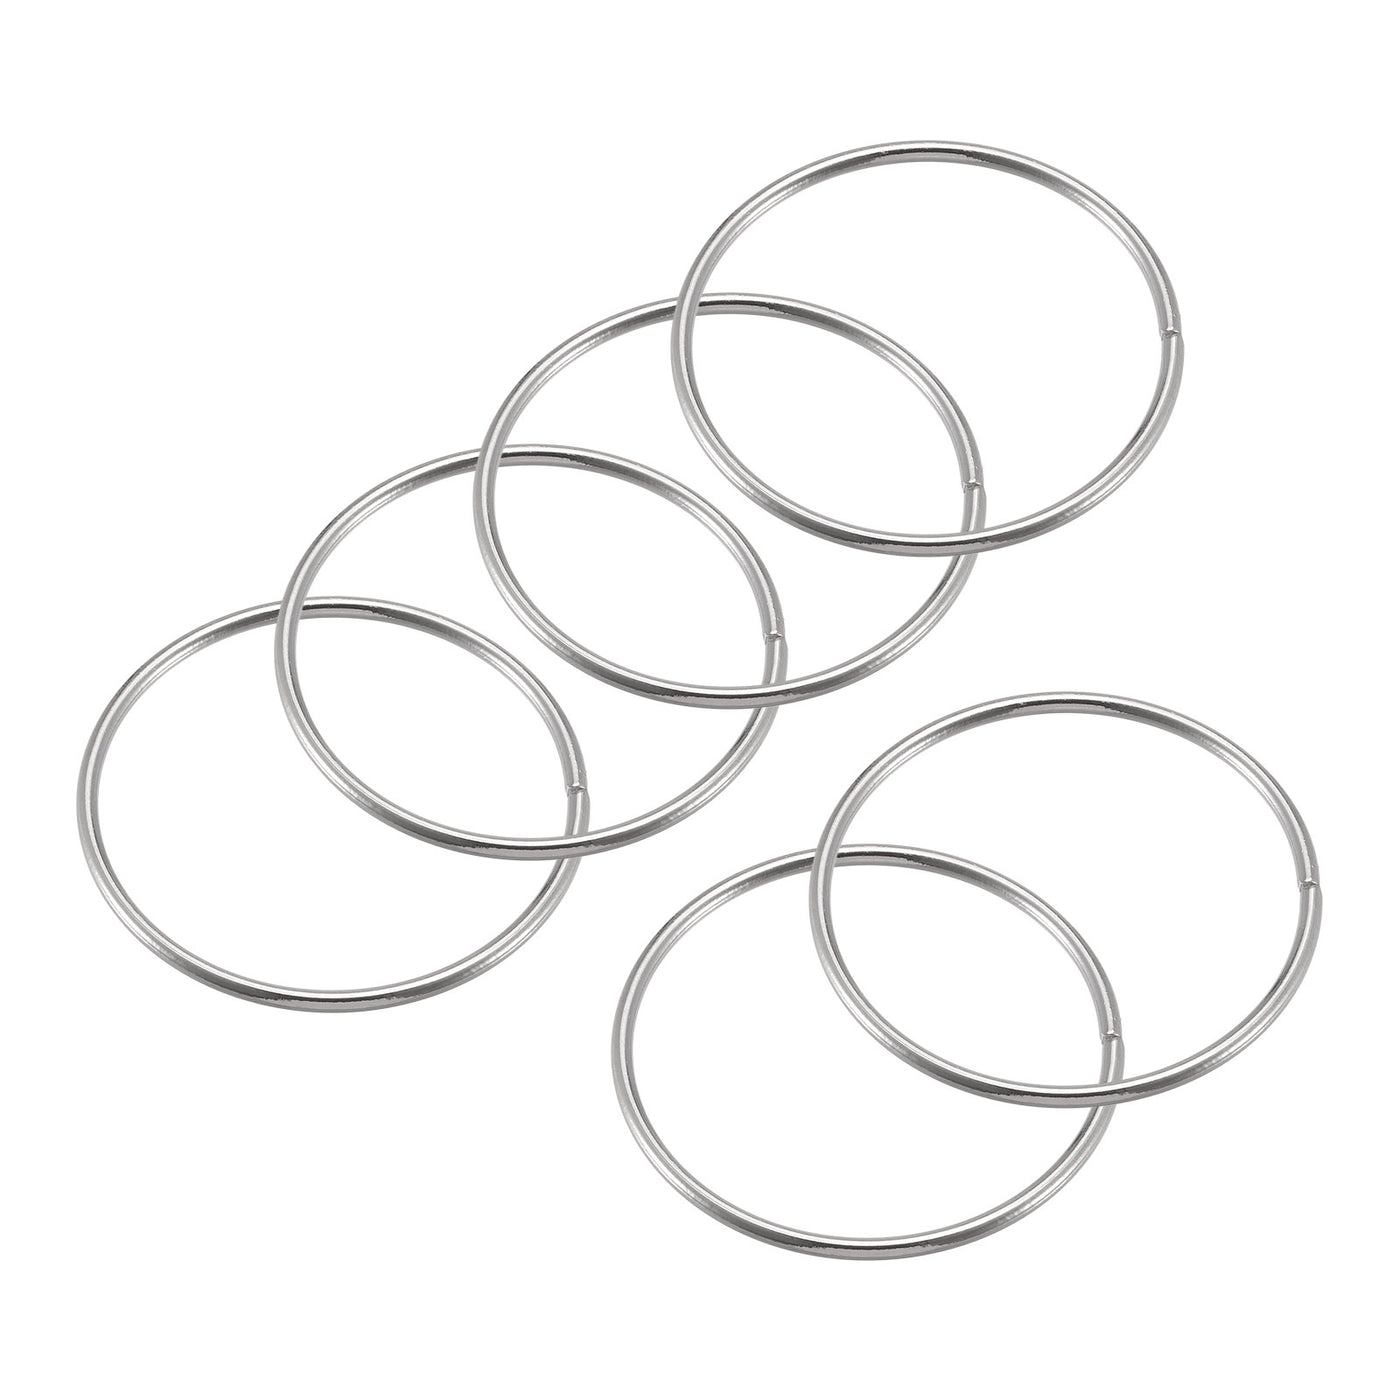 uxcell Uxcell 60mm(2.36") OD Metal O Ring Non-Welded Craft Hoops for DIY Silver Tone 12pcs